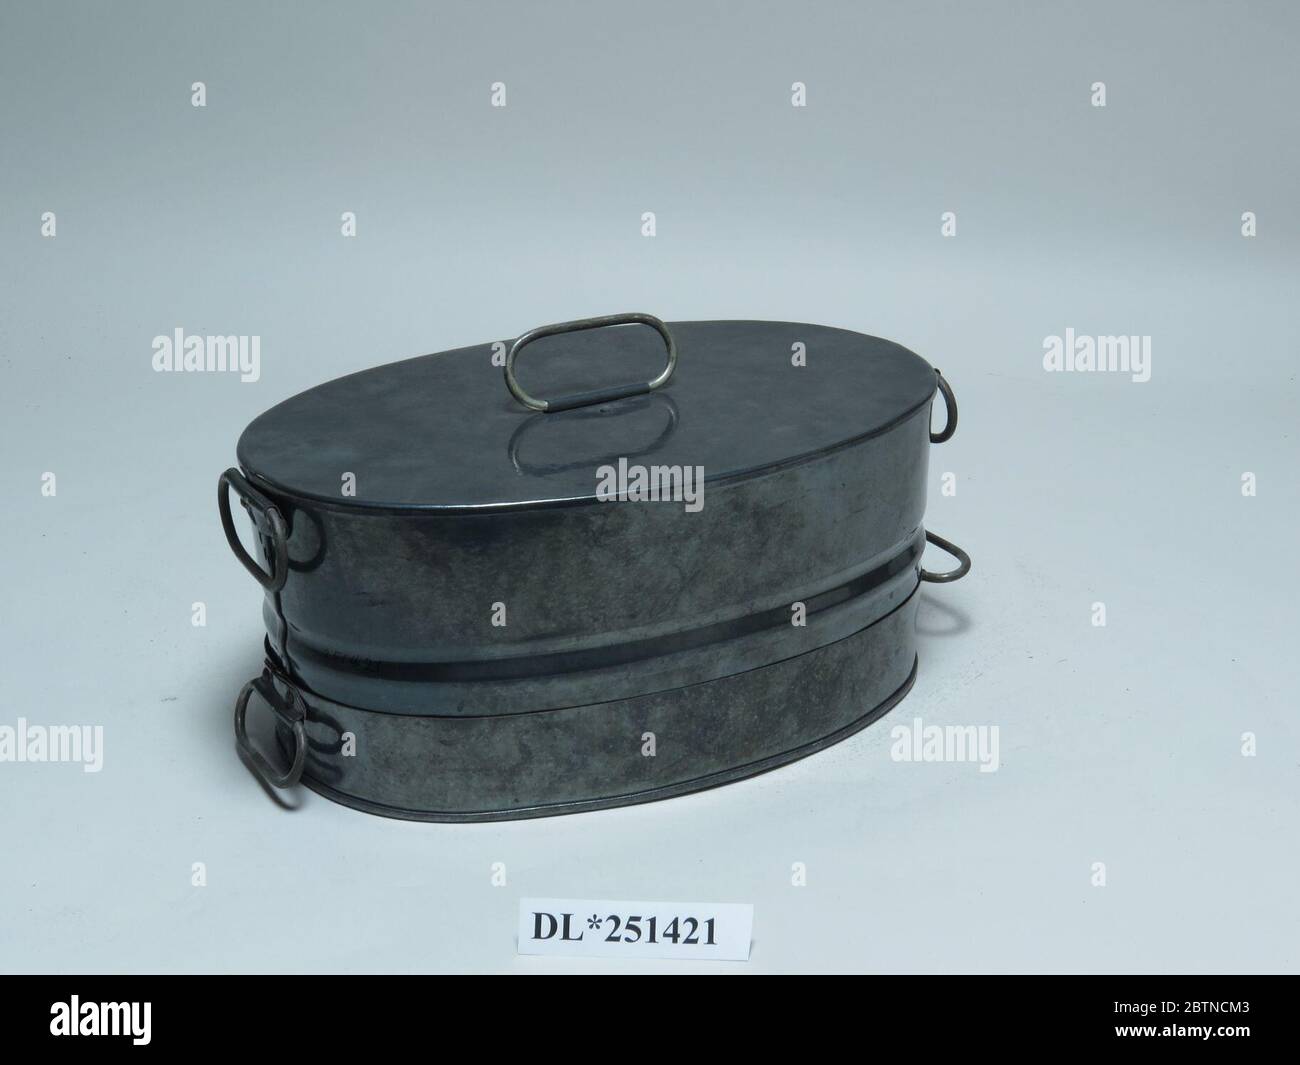 https://c8.alamy.com/comp/2BTNCM3/steam-cooker-full-size-patent-model-us-patent-no-124256-of-a-set-of-oval-pans-for-baking-roasting-and-cooking-made-by-thomas-j-t-cummings-of-fort-wayne-in-and-patented-on-march-5-1872-consists-of-an-exterior-cover-and-bottom-two-interior-pans-and-a-set-of-four-circular-bands-2BTNCM3.jpg